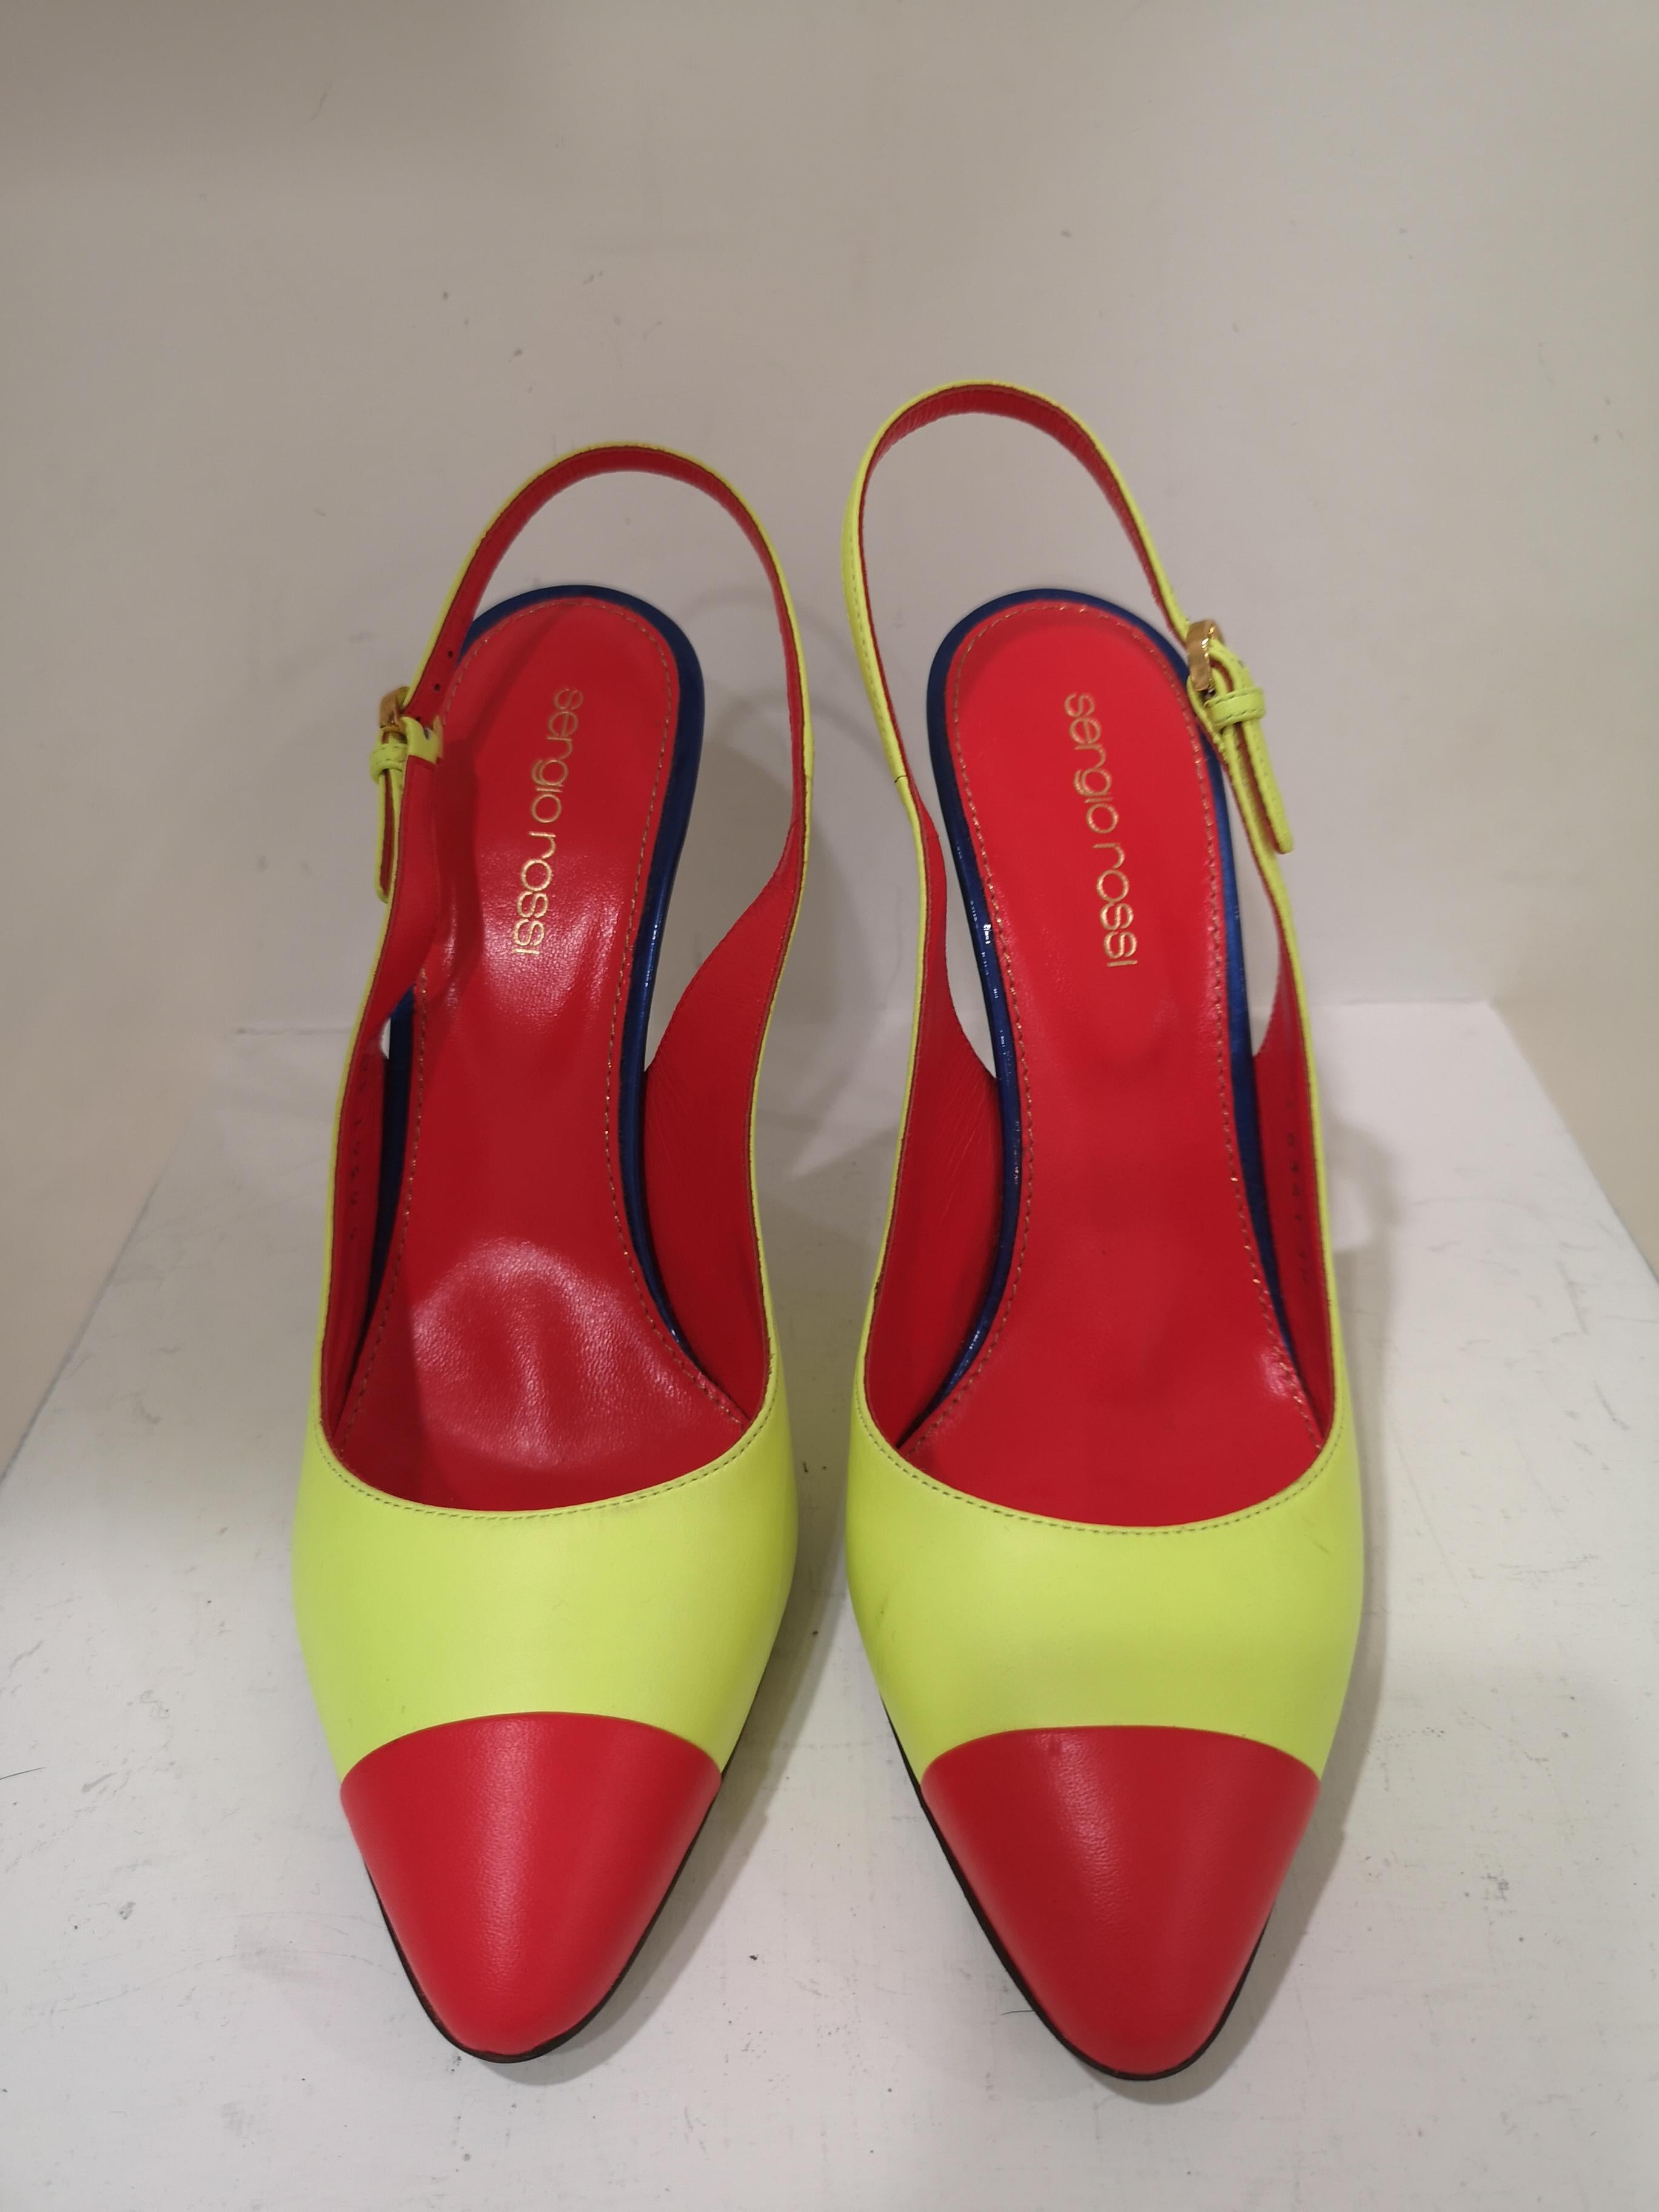 Sergio Rossi Red Blue Fluo Yellow Decollete For Sale 6